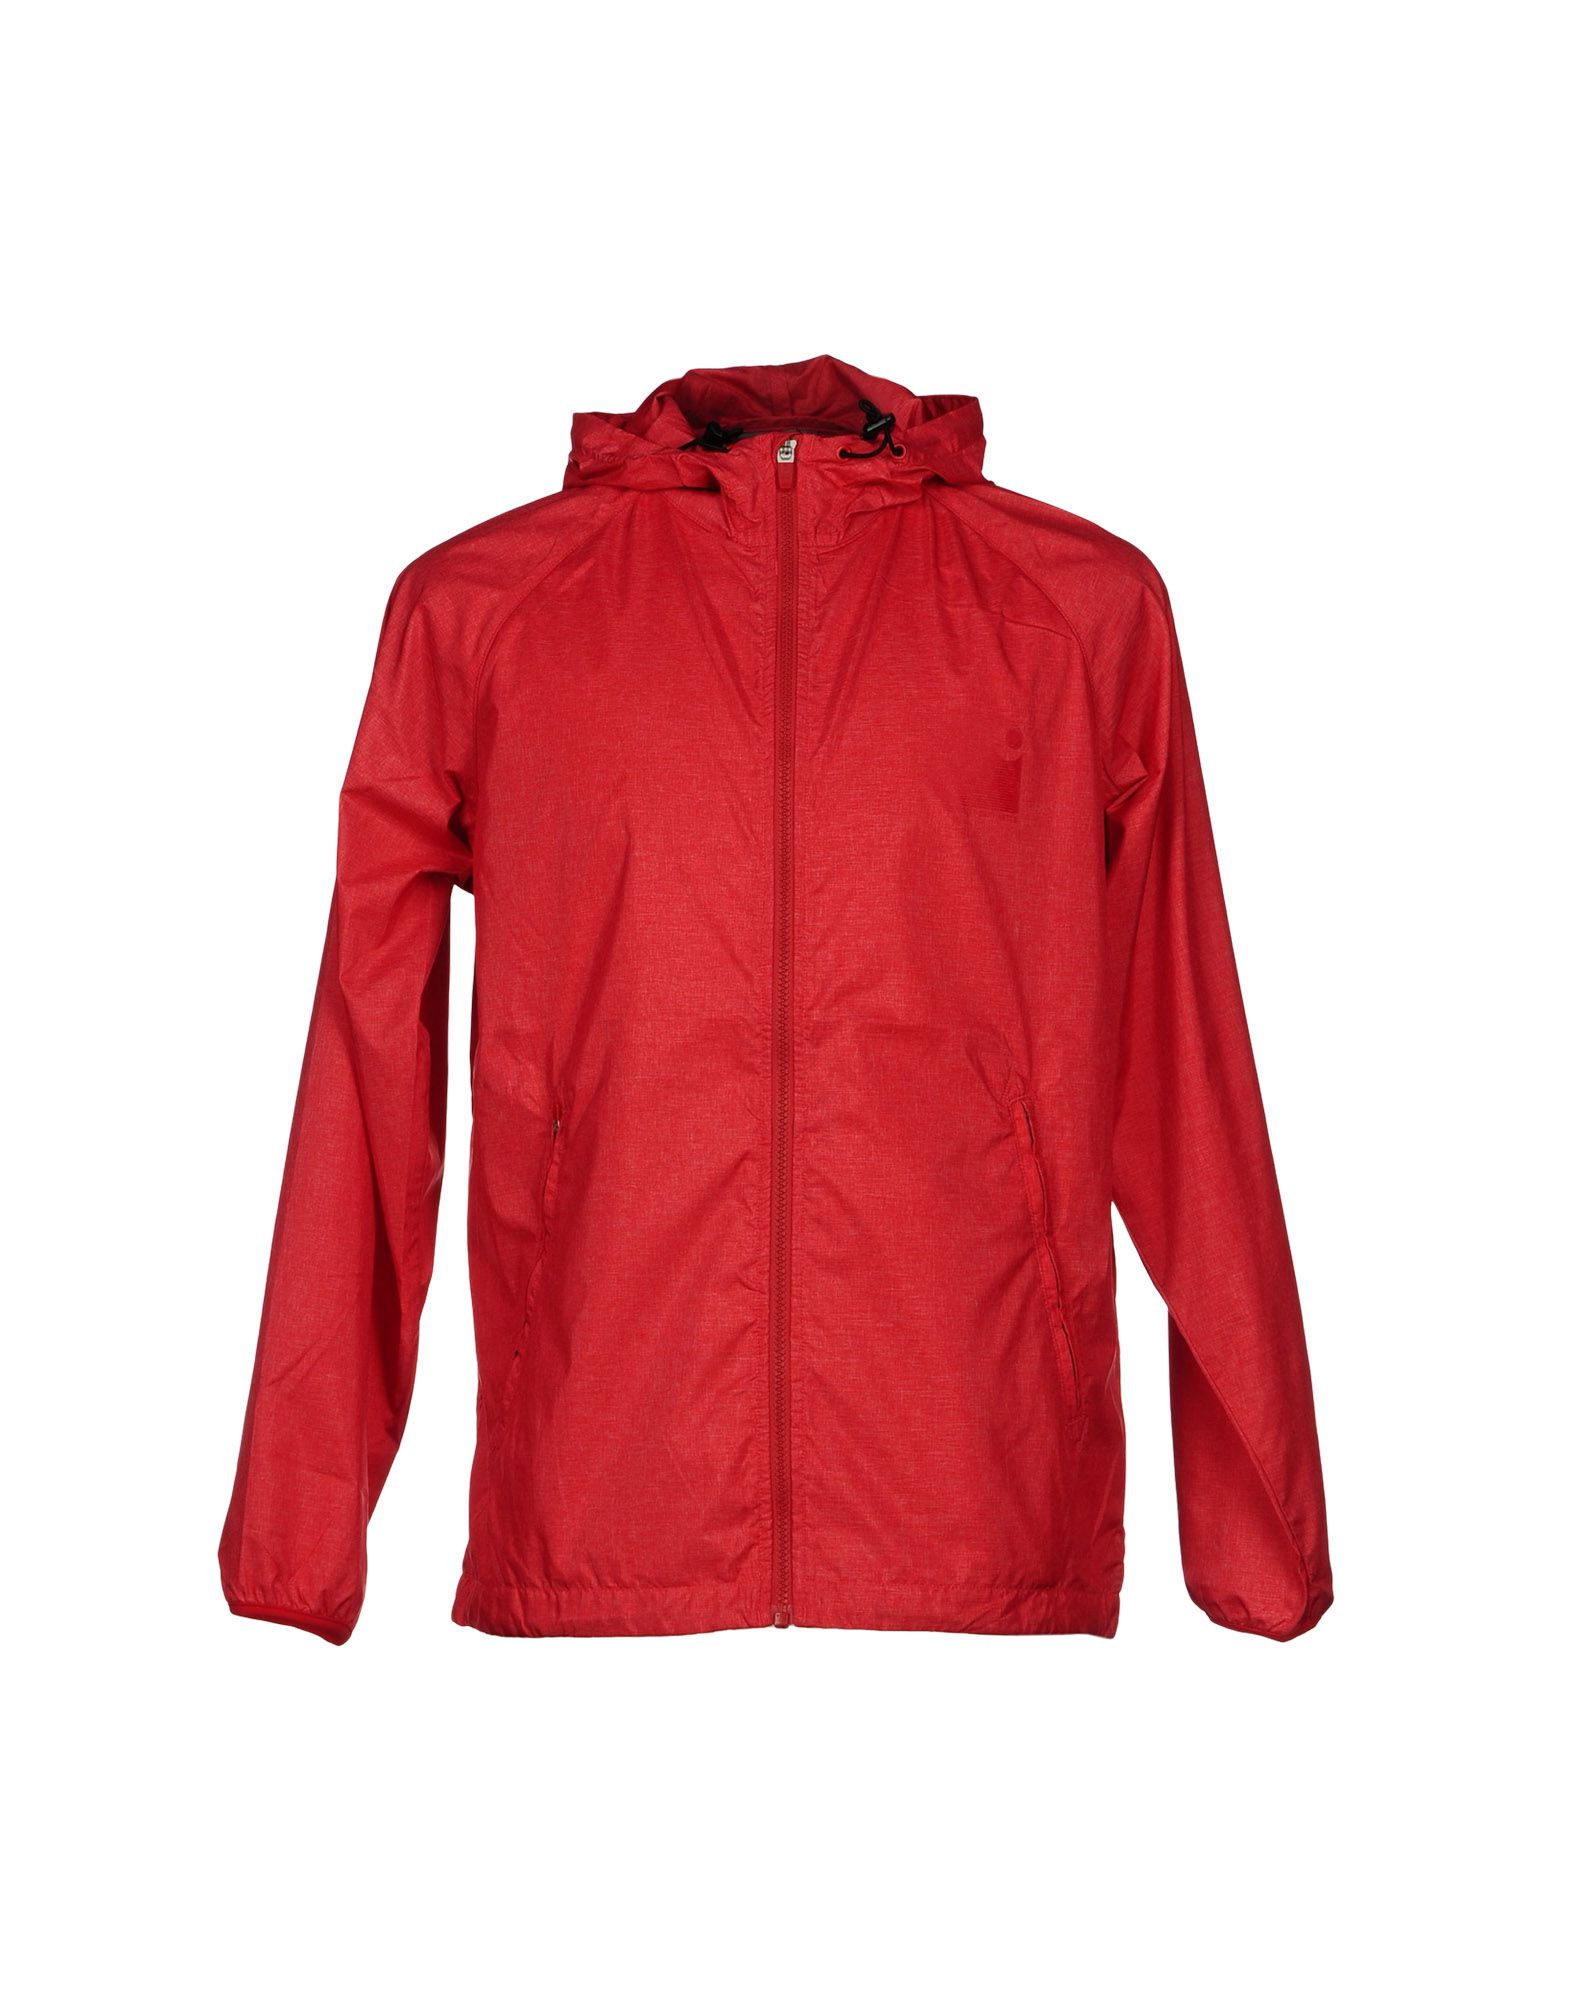 Carhartt Synthetic Jacket in Red for Men - Lyst